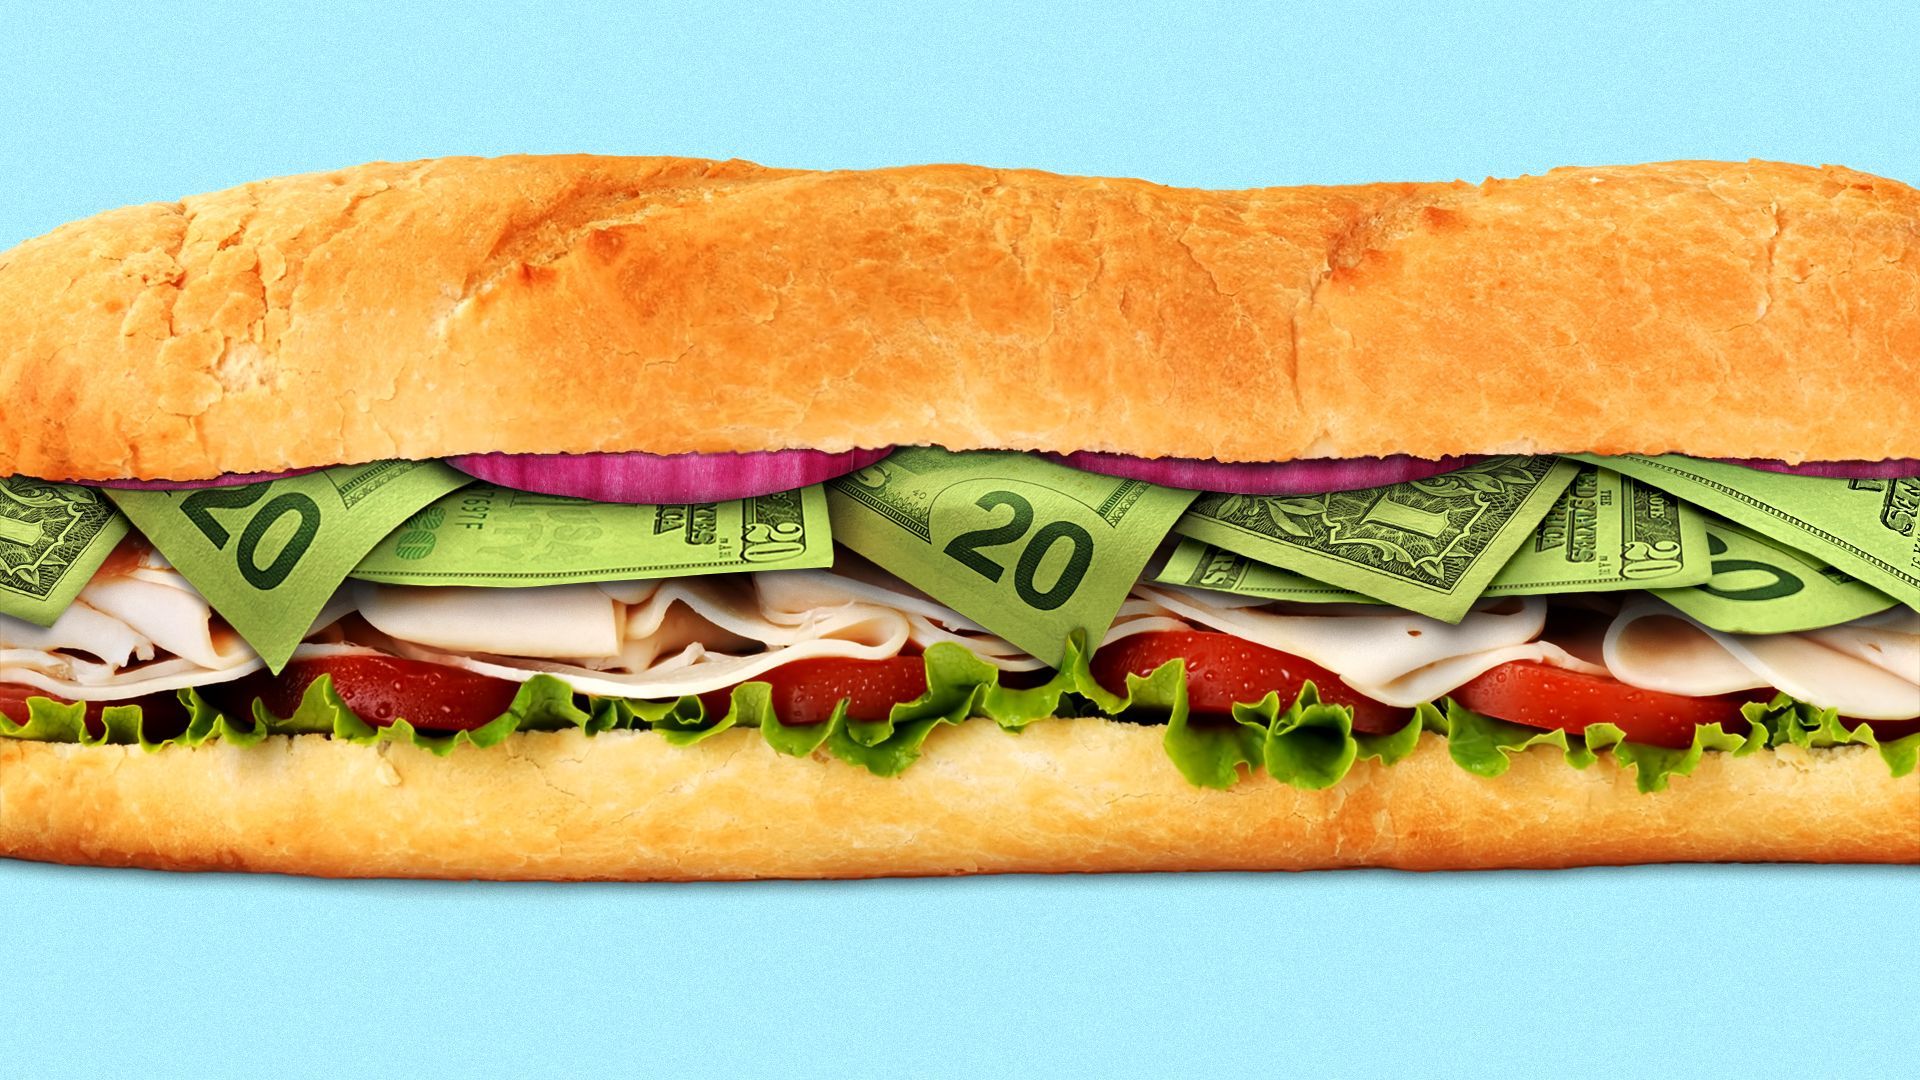 an illustration of a footlong sandwich stuffed with turkey, tomatoes, lettuce, onions and dollar bills 